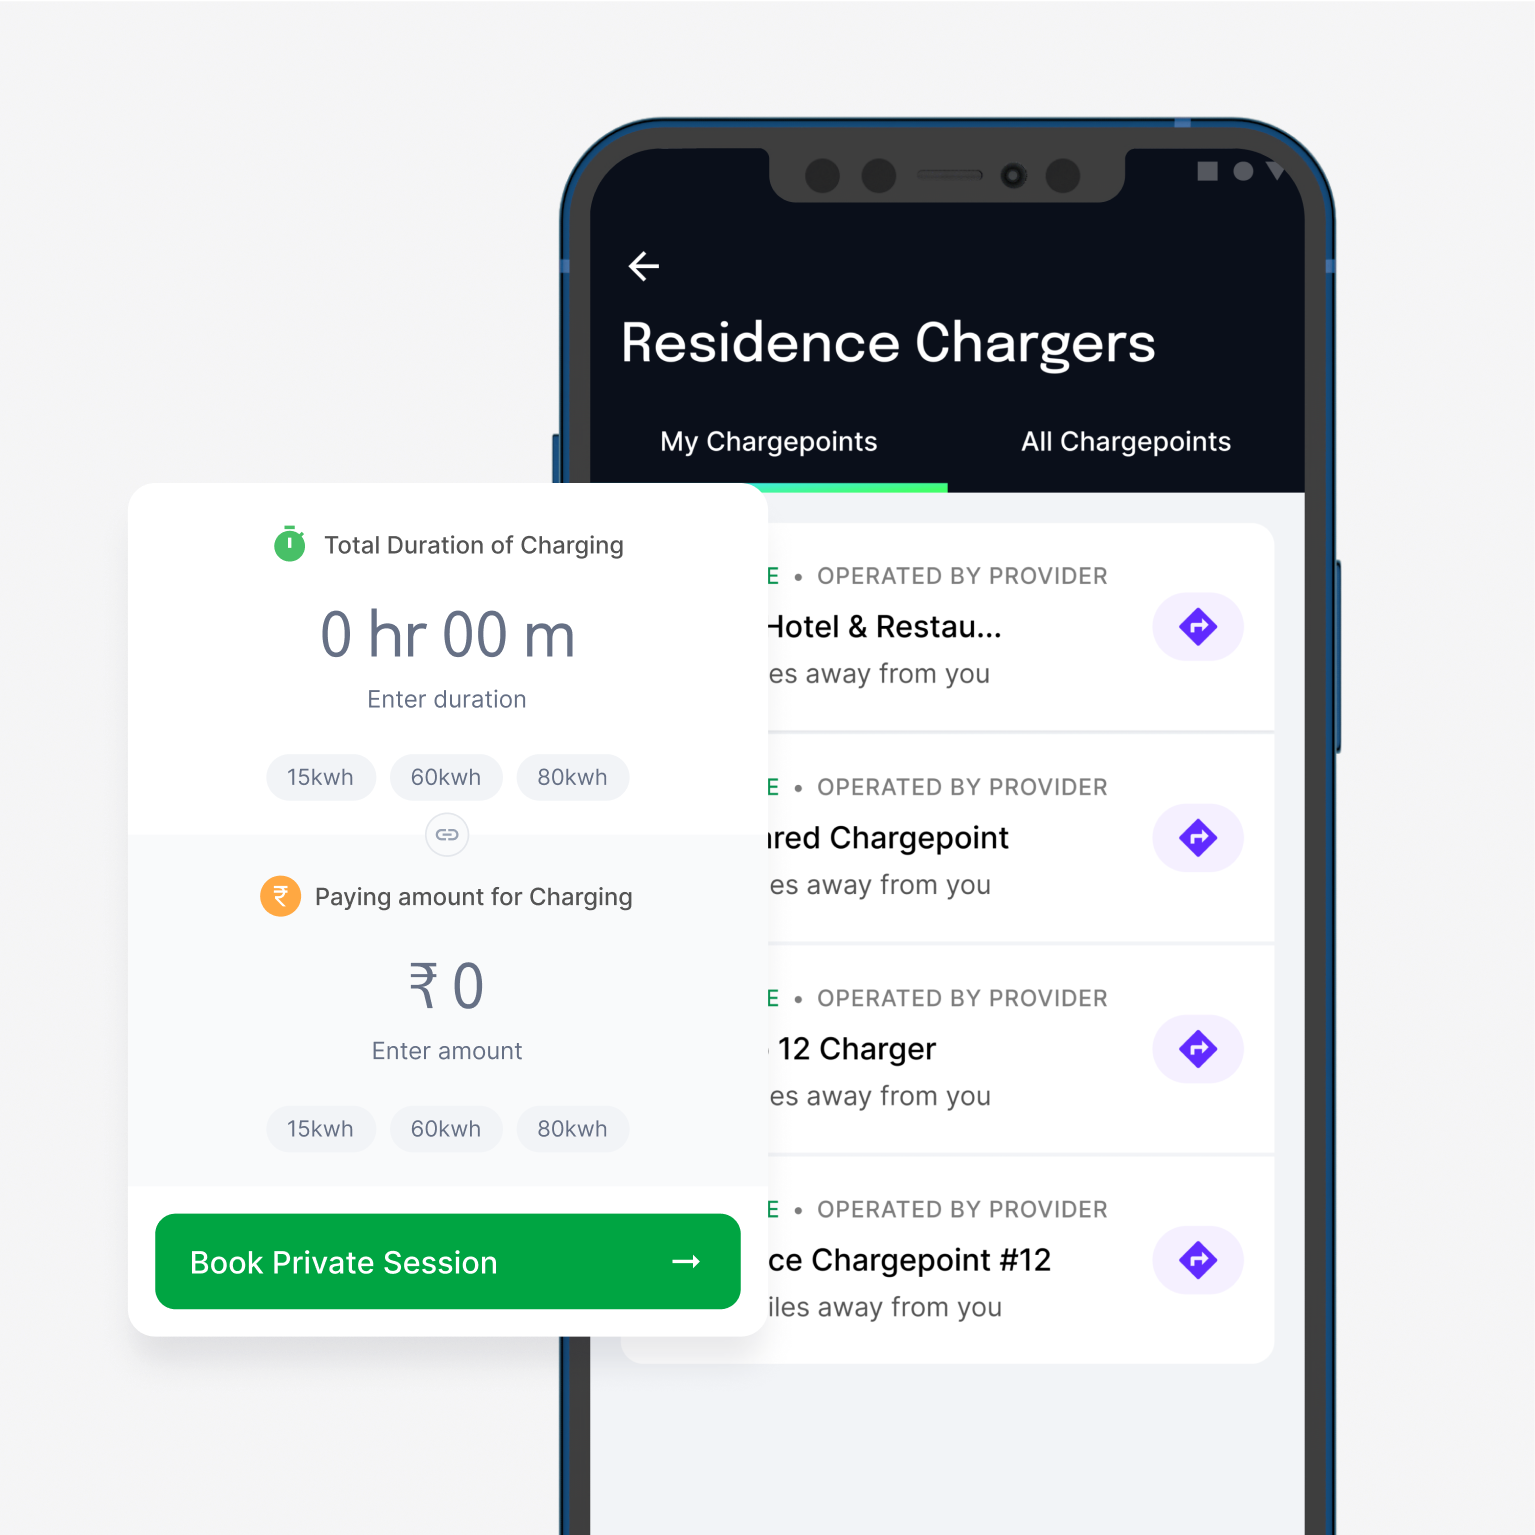 Representation of how residents are served a better charging experience through mobile app.